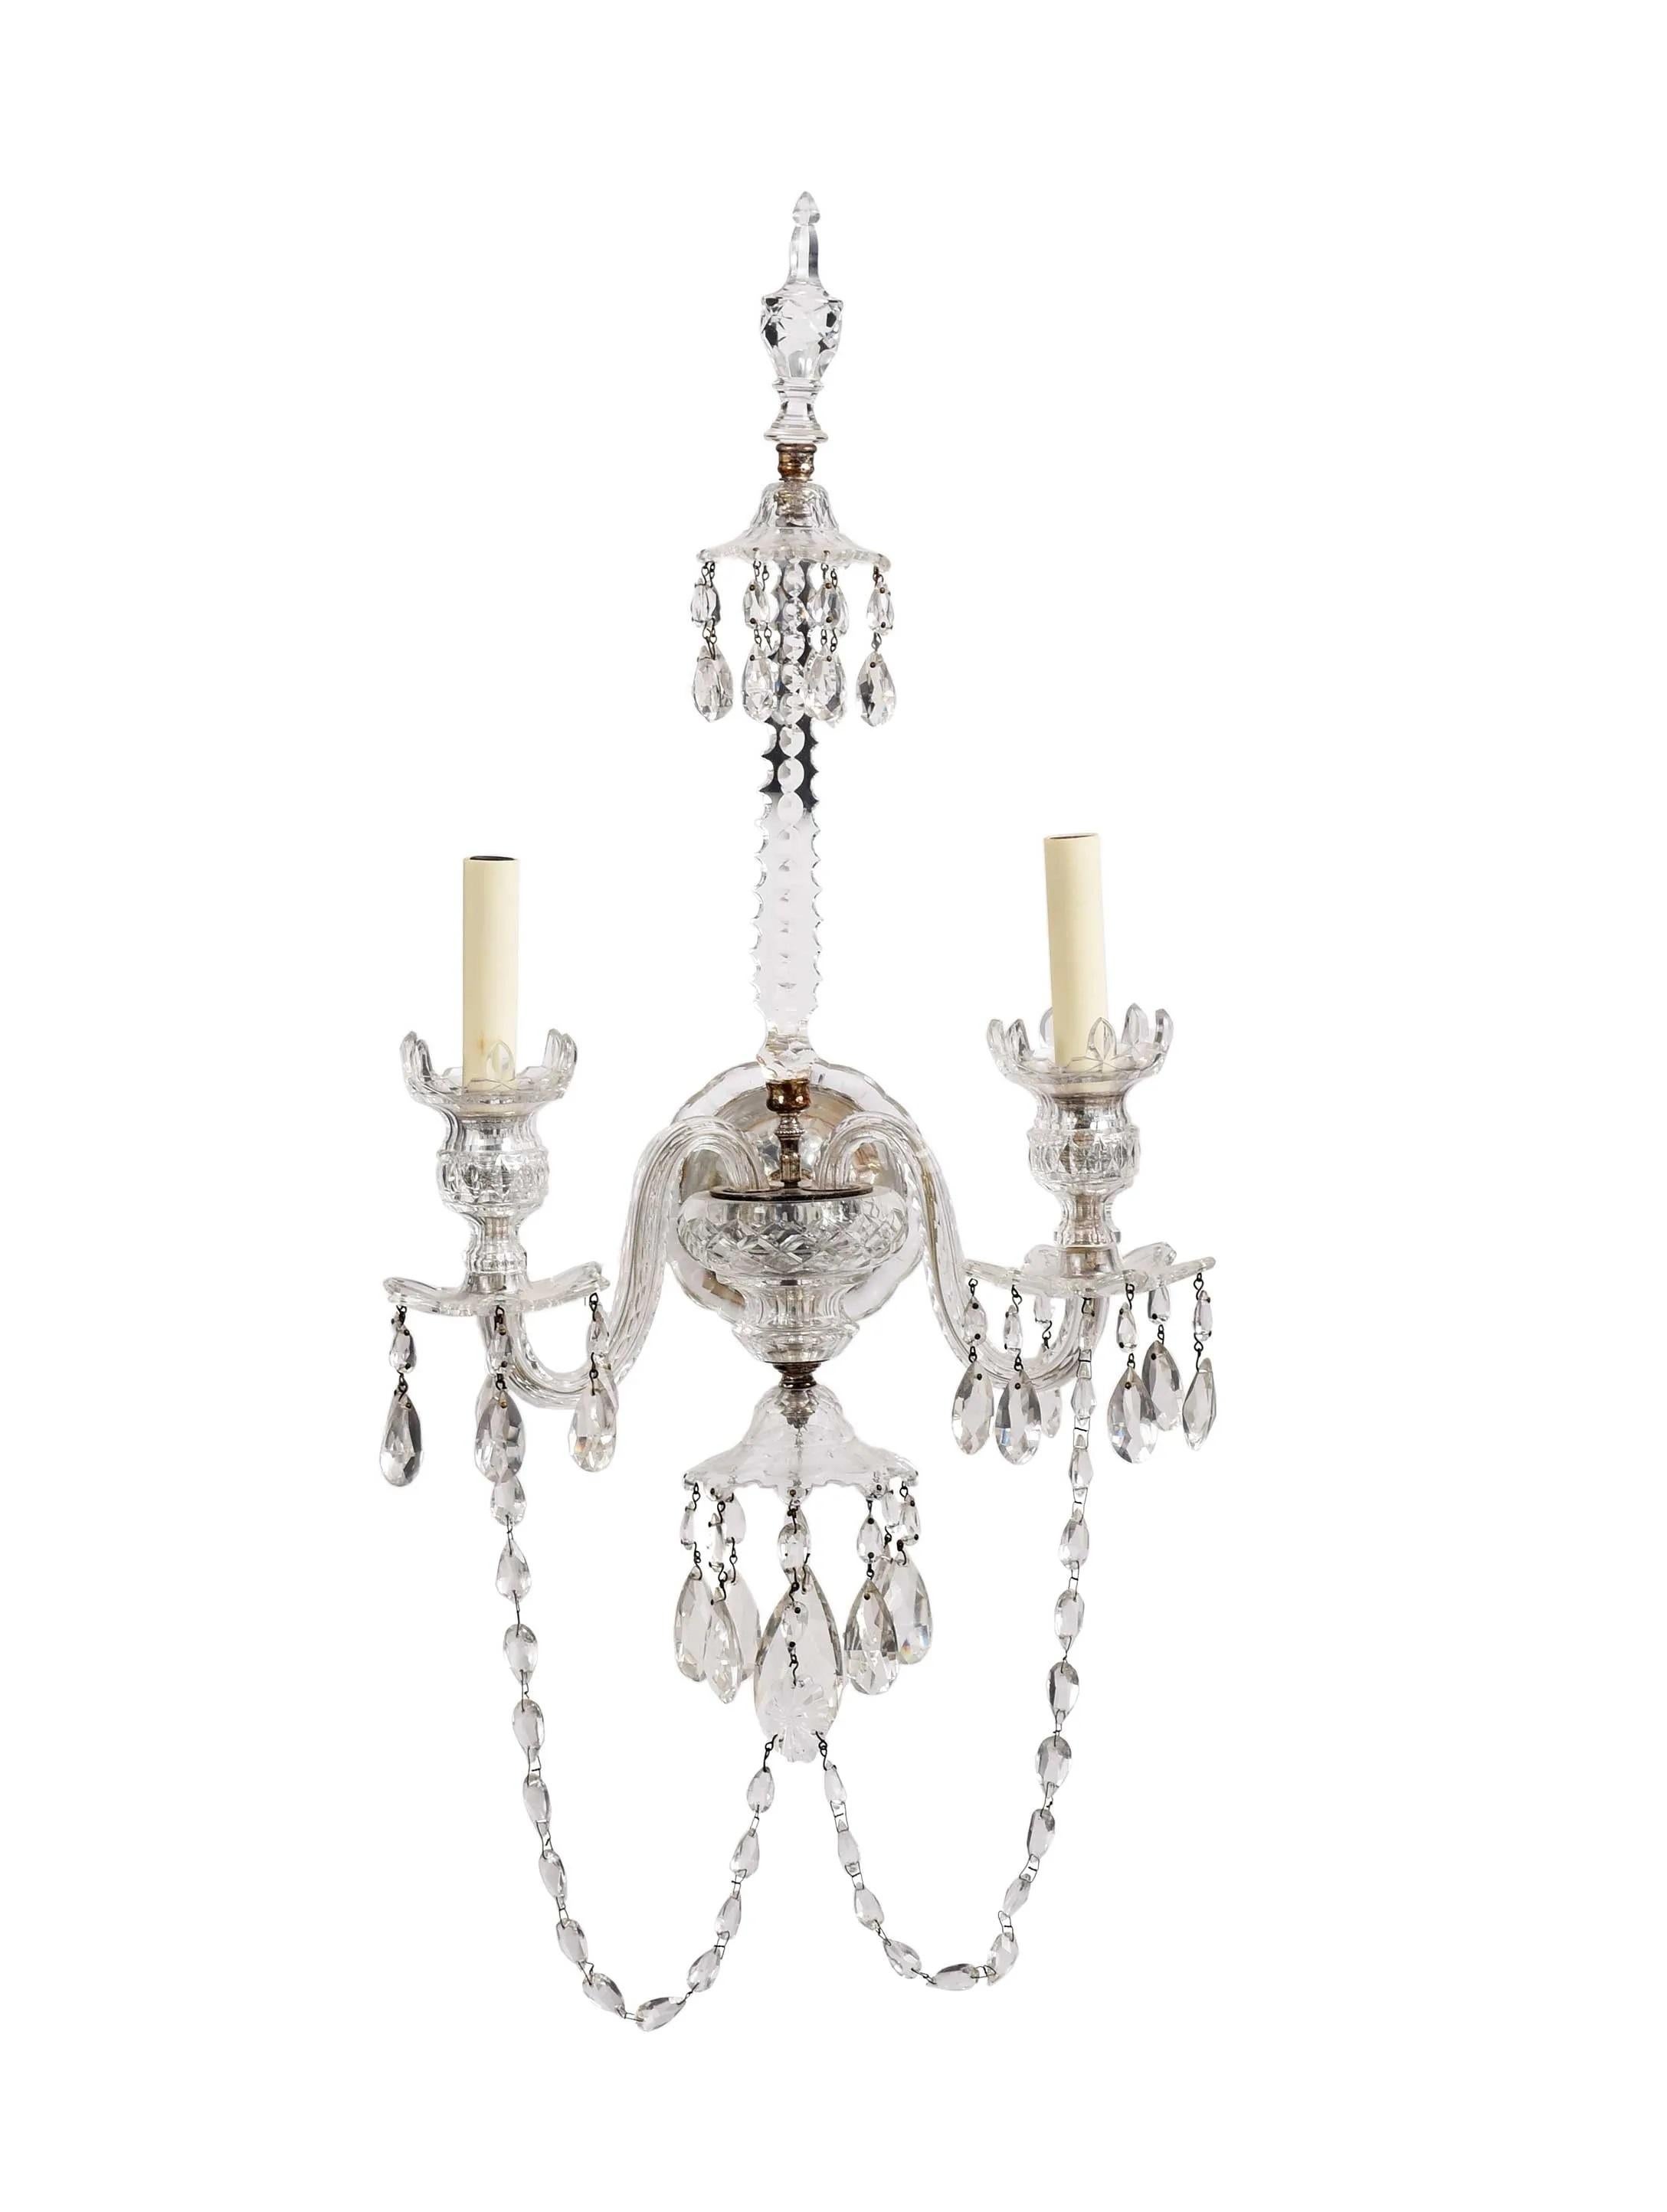 a pair of crystal tow light wall sconces, Nesle Inc., New York, wall mount supporting central column with two S scrolled arms with electric candle lights, surmounted by faceted finial, suspended throughout with drops and garland, wired for